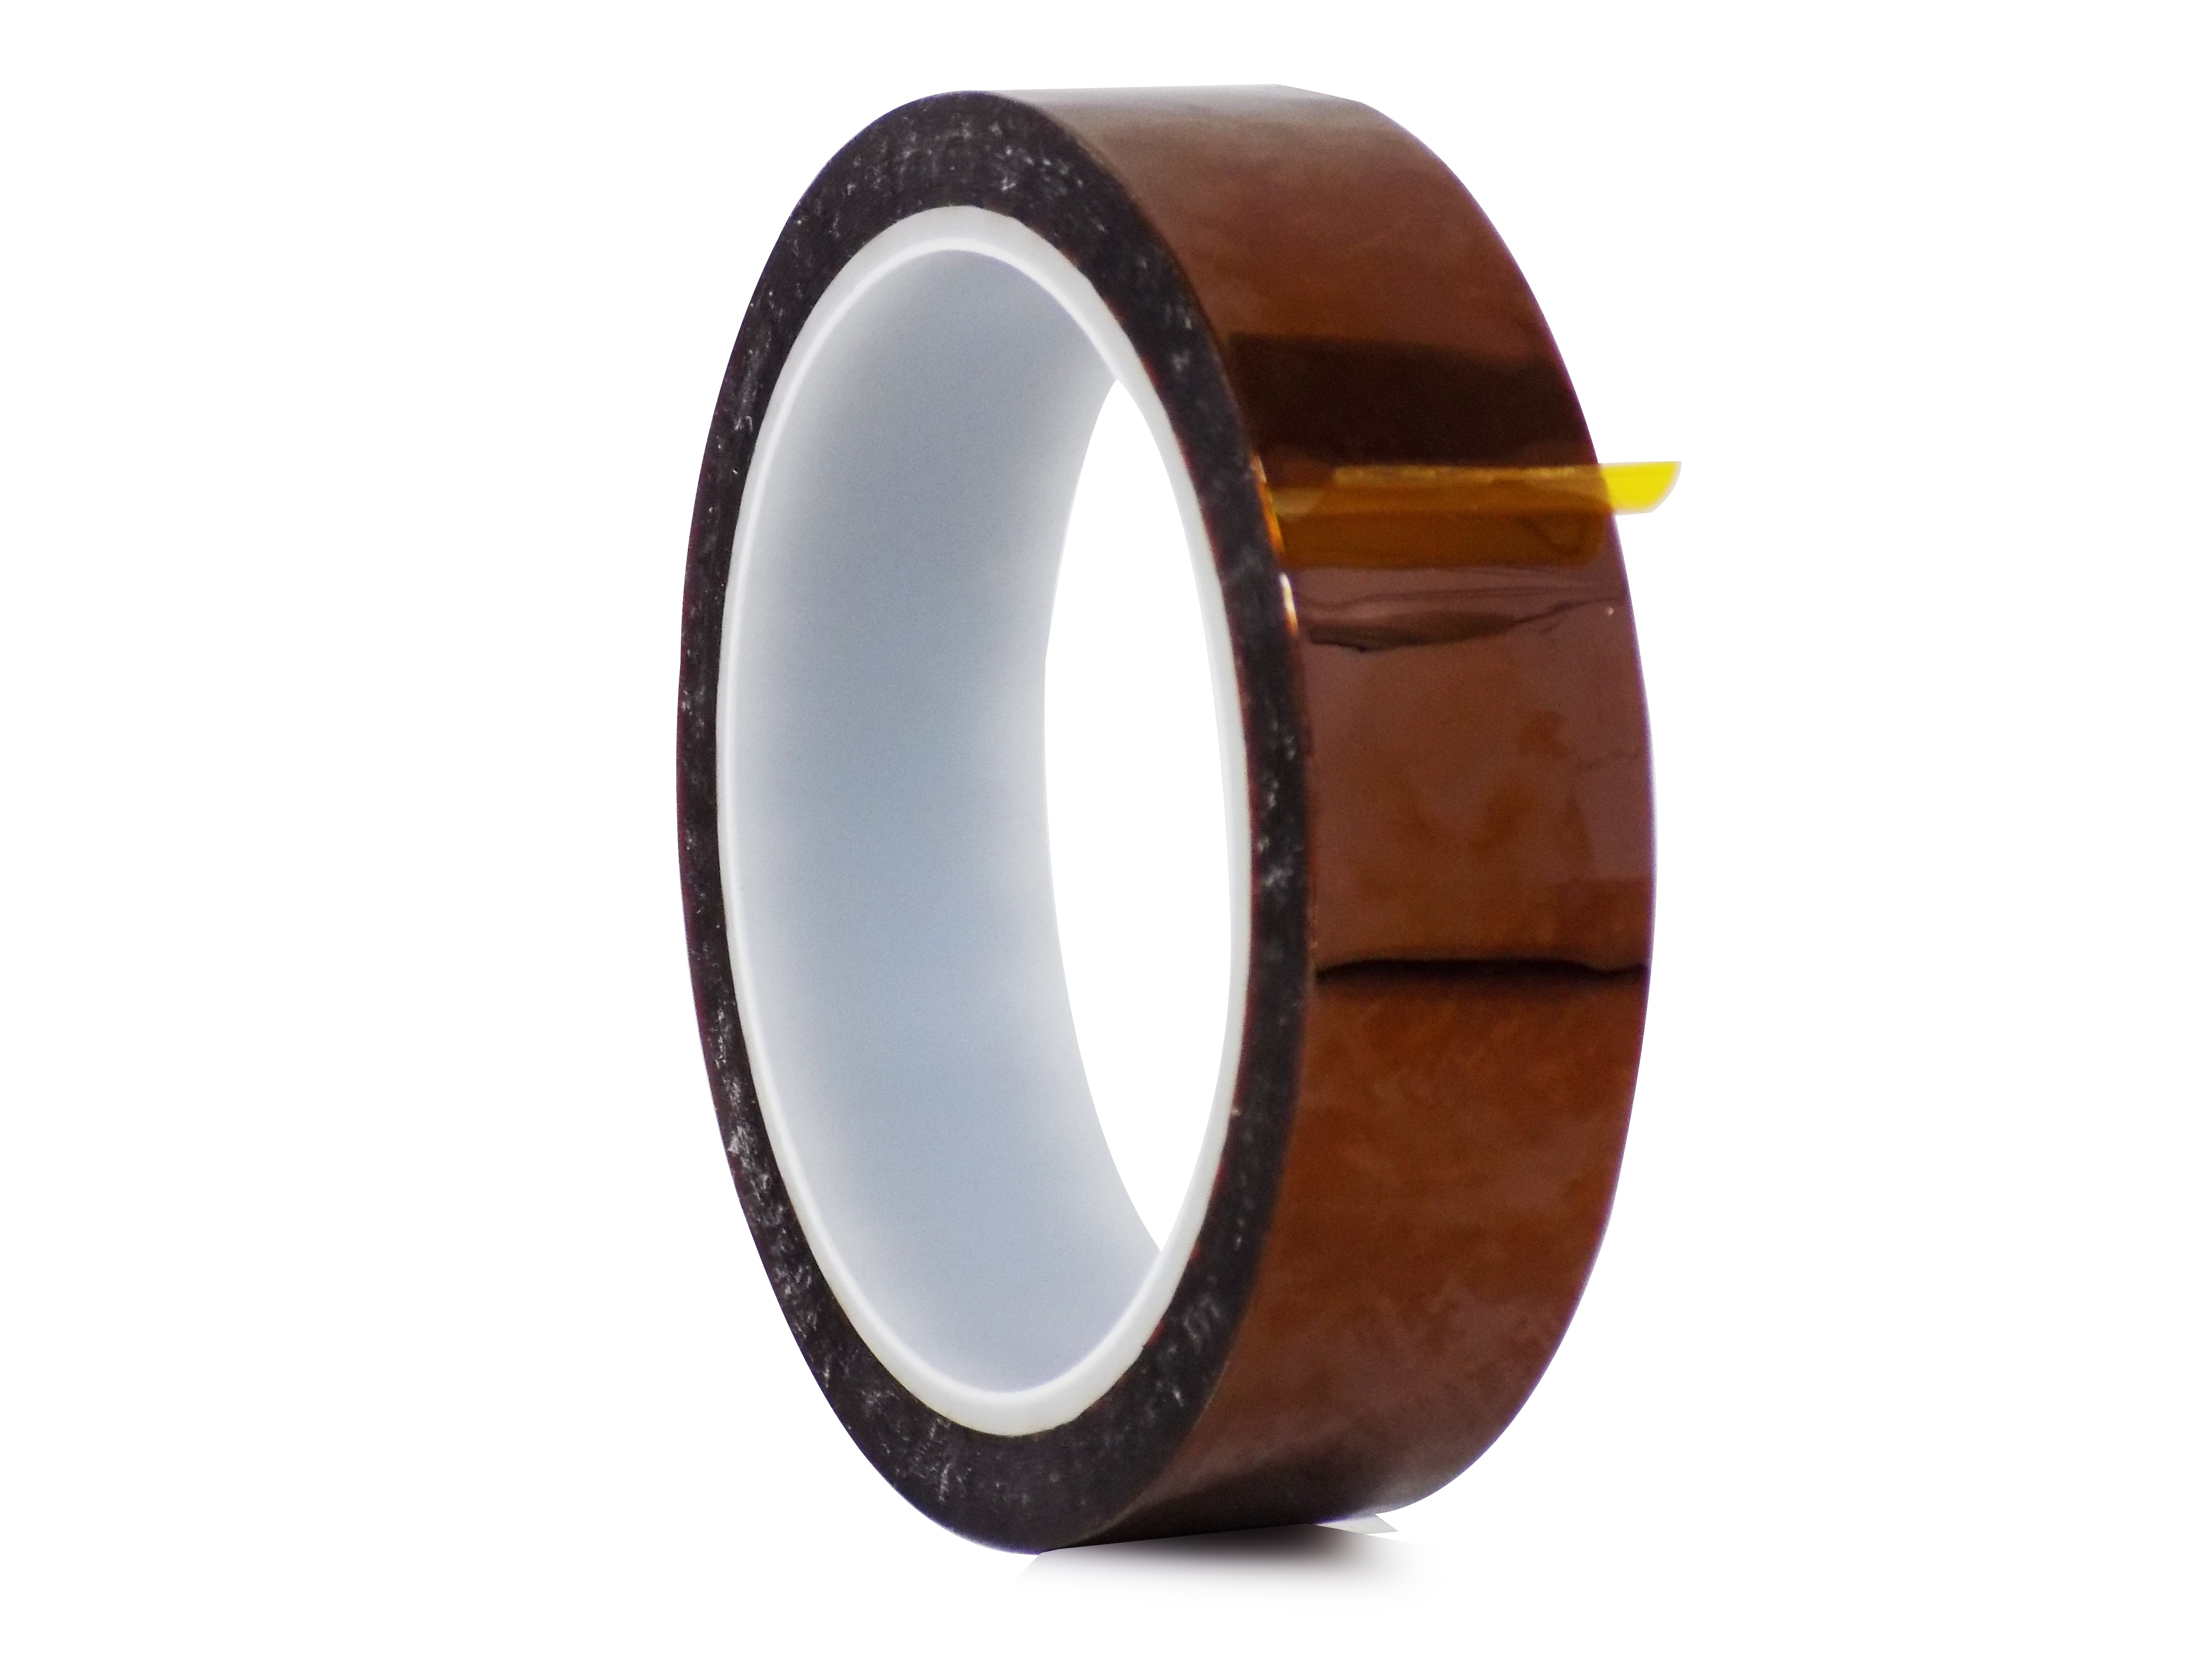 High Temp Tape 13/64 Inch x 98ft Heat Resistant Polyimide Tape - Brown -  Bed Bath & Beyond - 37332406